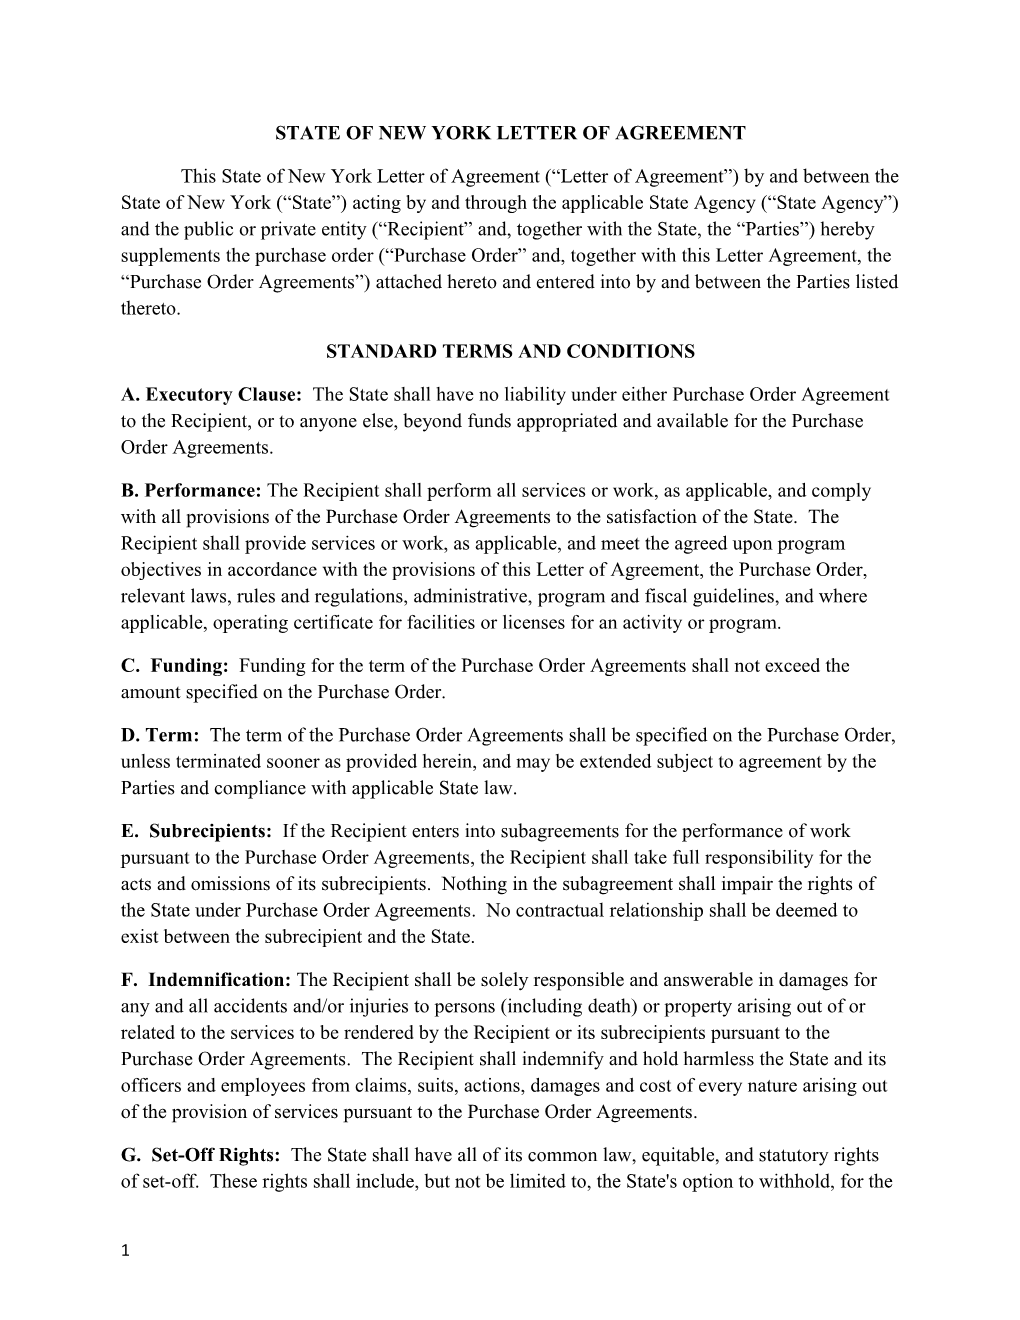 State of New York Letter of Agreement